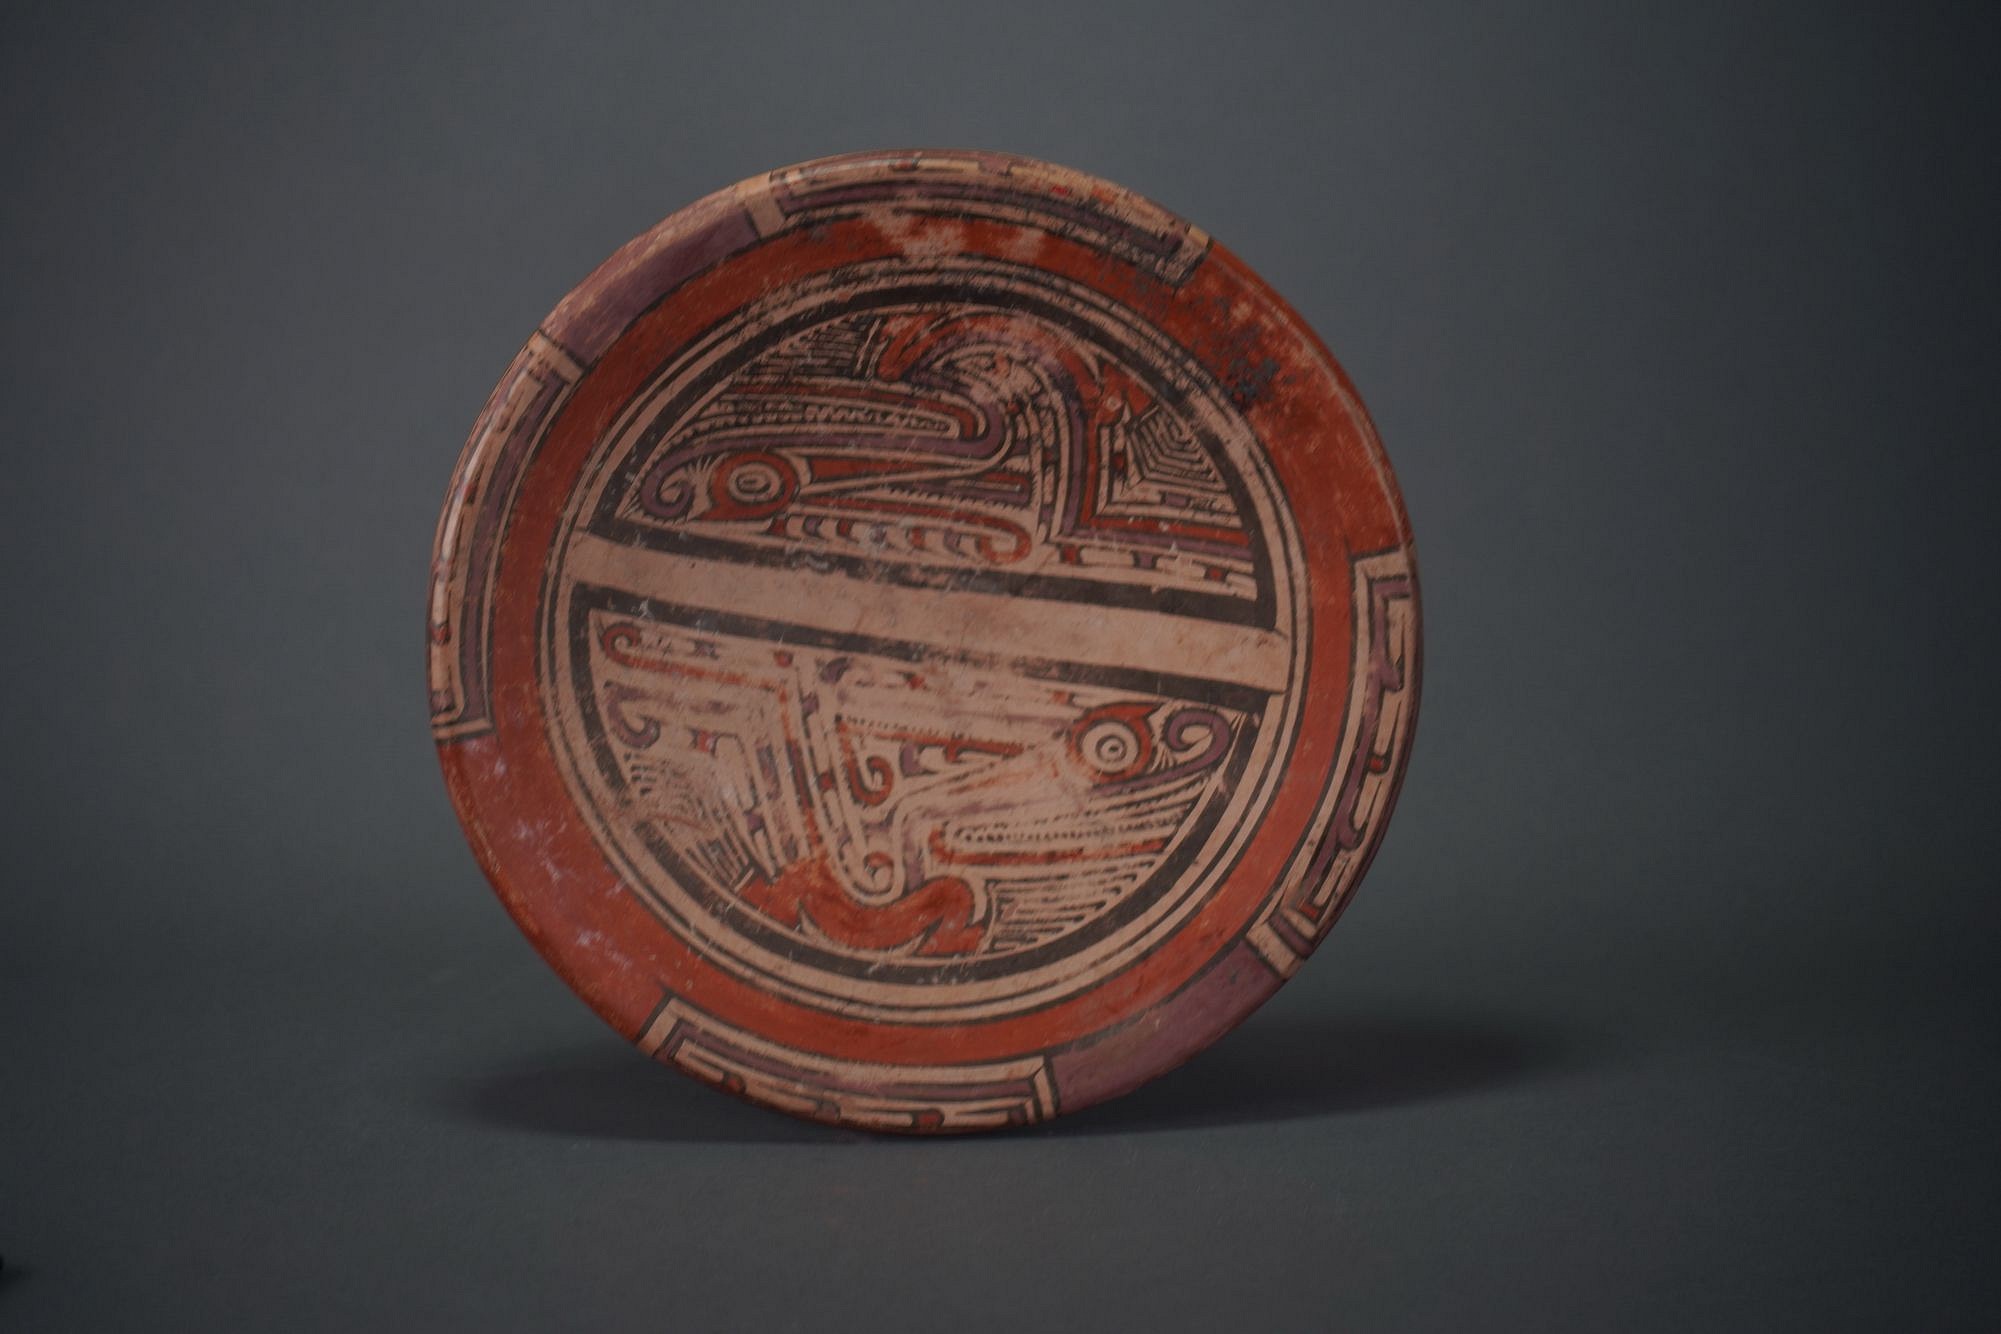 Panama, Macaracas Stye Ceramic Dish Decorated with Stylized Pair of Saurians
The Saurian figures appear in profile in opposite directions and are separated by a narrow band.  Violet and red pigments are used to skillfully define the shapes of the creatures.  The Saurian figures appear on the front, back, and sides of the dish.  Similar saurian designs are illustrated in GUARDIANS OF THE LIFE STREAM by Armand Labbe, fig. 41.  Ex- Los Angles collection.
Media: Ceramic
Dimensions: Diameter: 7 1/2"
$1,650
P1056